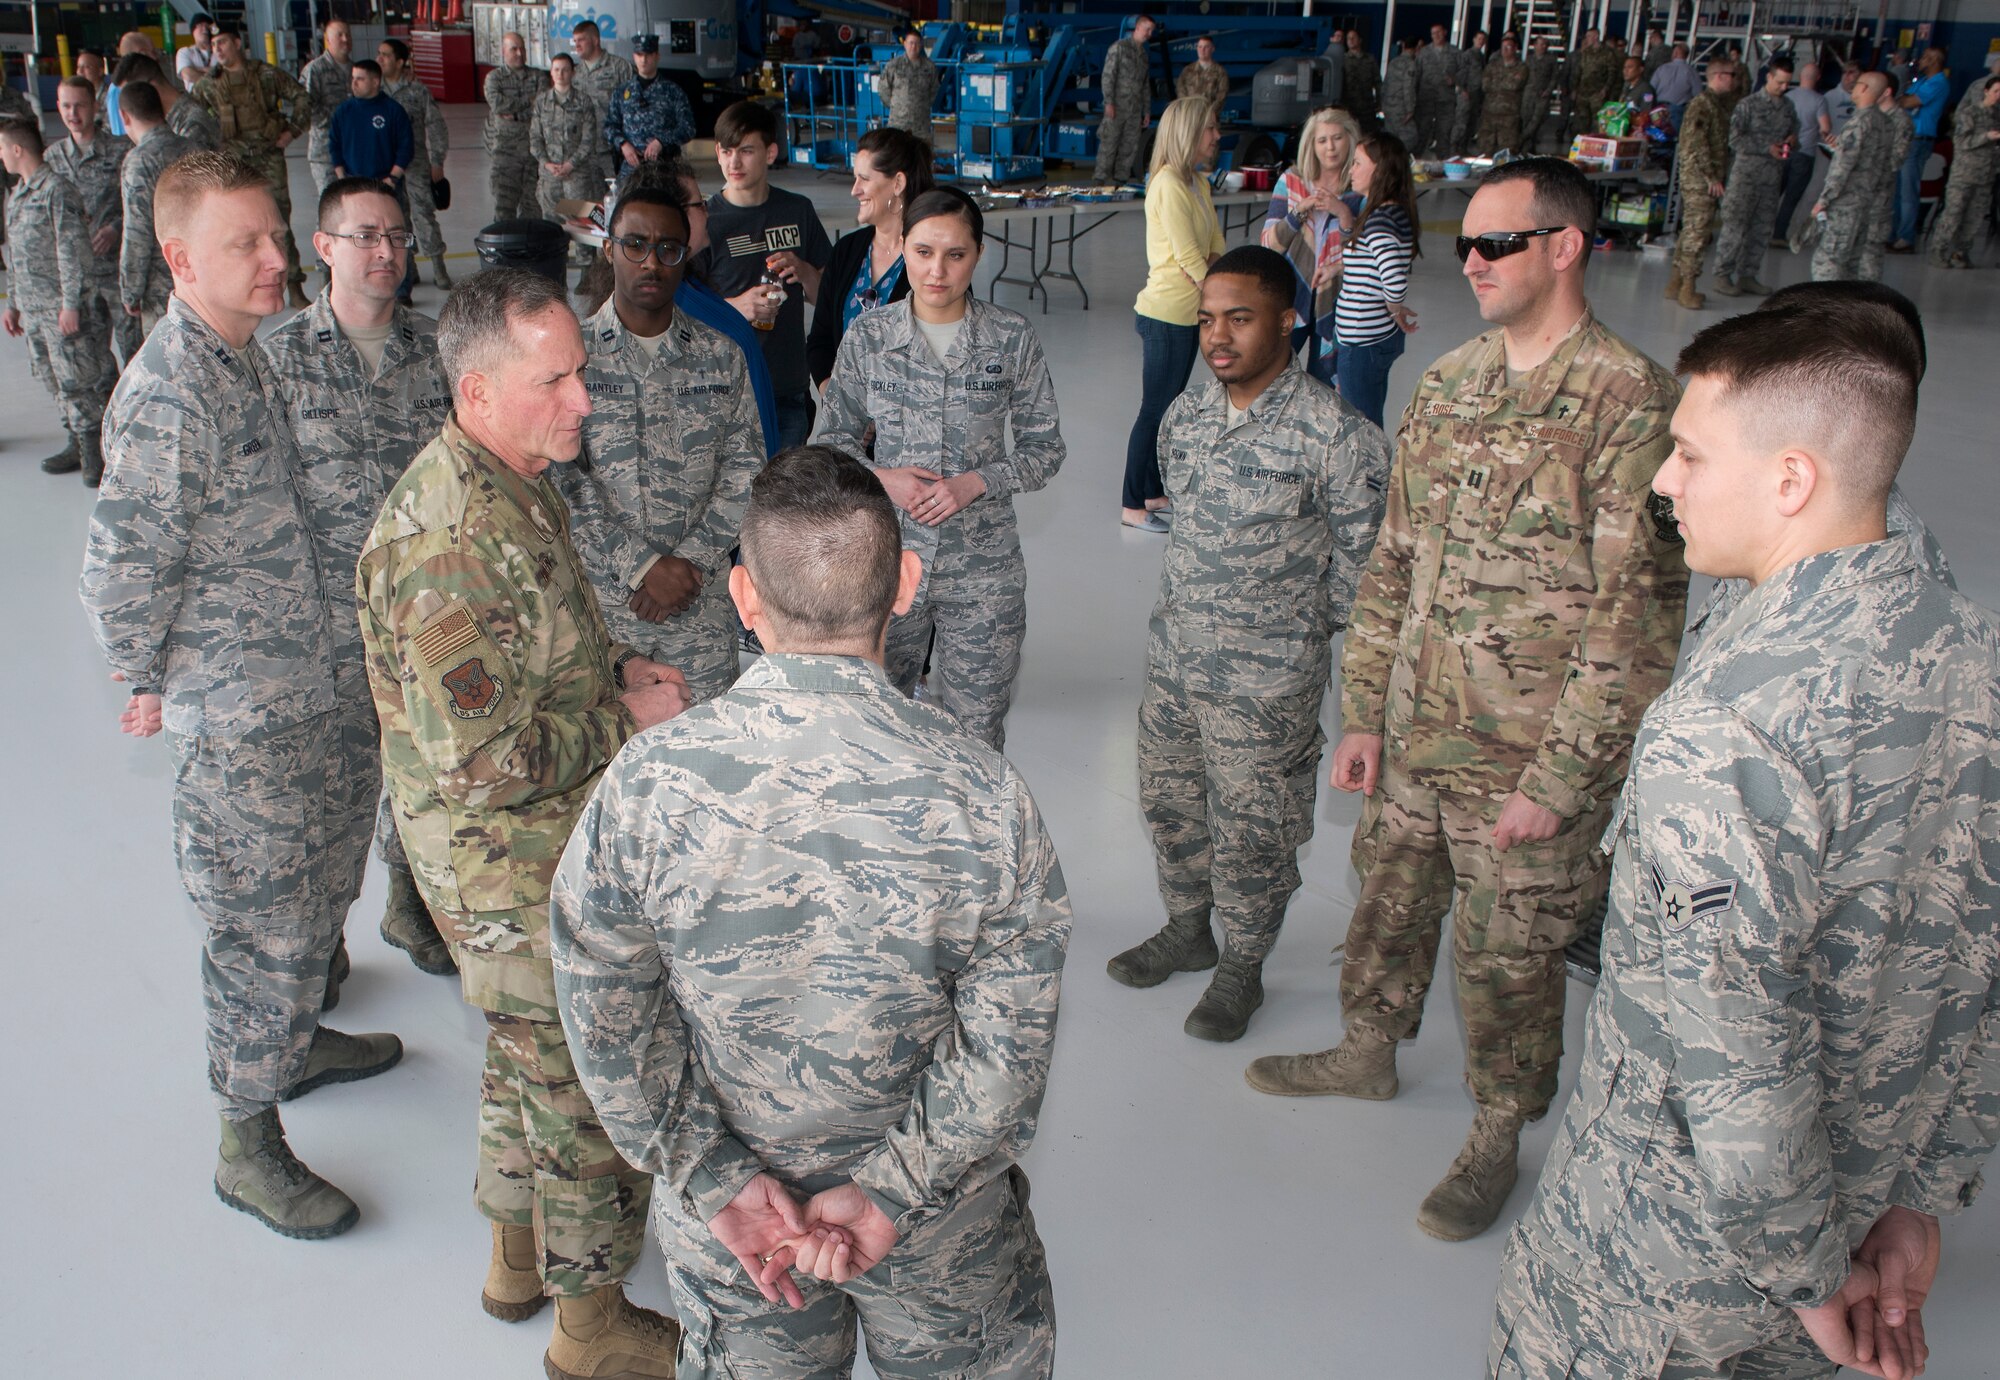 Air Force Chief of Staff Gen. David L. Goldfein talks with Airmen during his visit to Offutt Air Force Base, Nebraska, March 27, 2019. Goldfein was joined by Chief Master Sgt. of the Air Force Kaleth O. Wright to survey damage caused by recent flooding. (U.S. Air Force photo by Delanie Stafford)